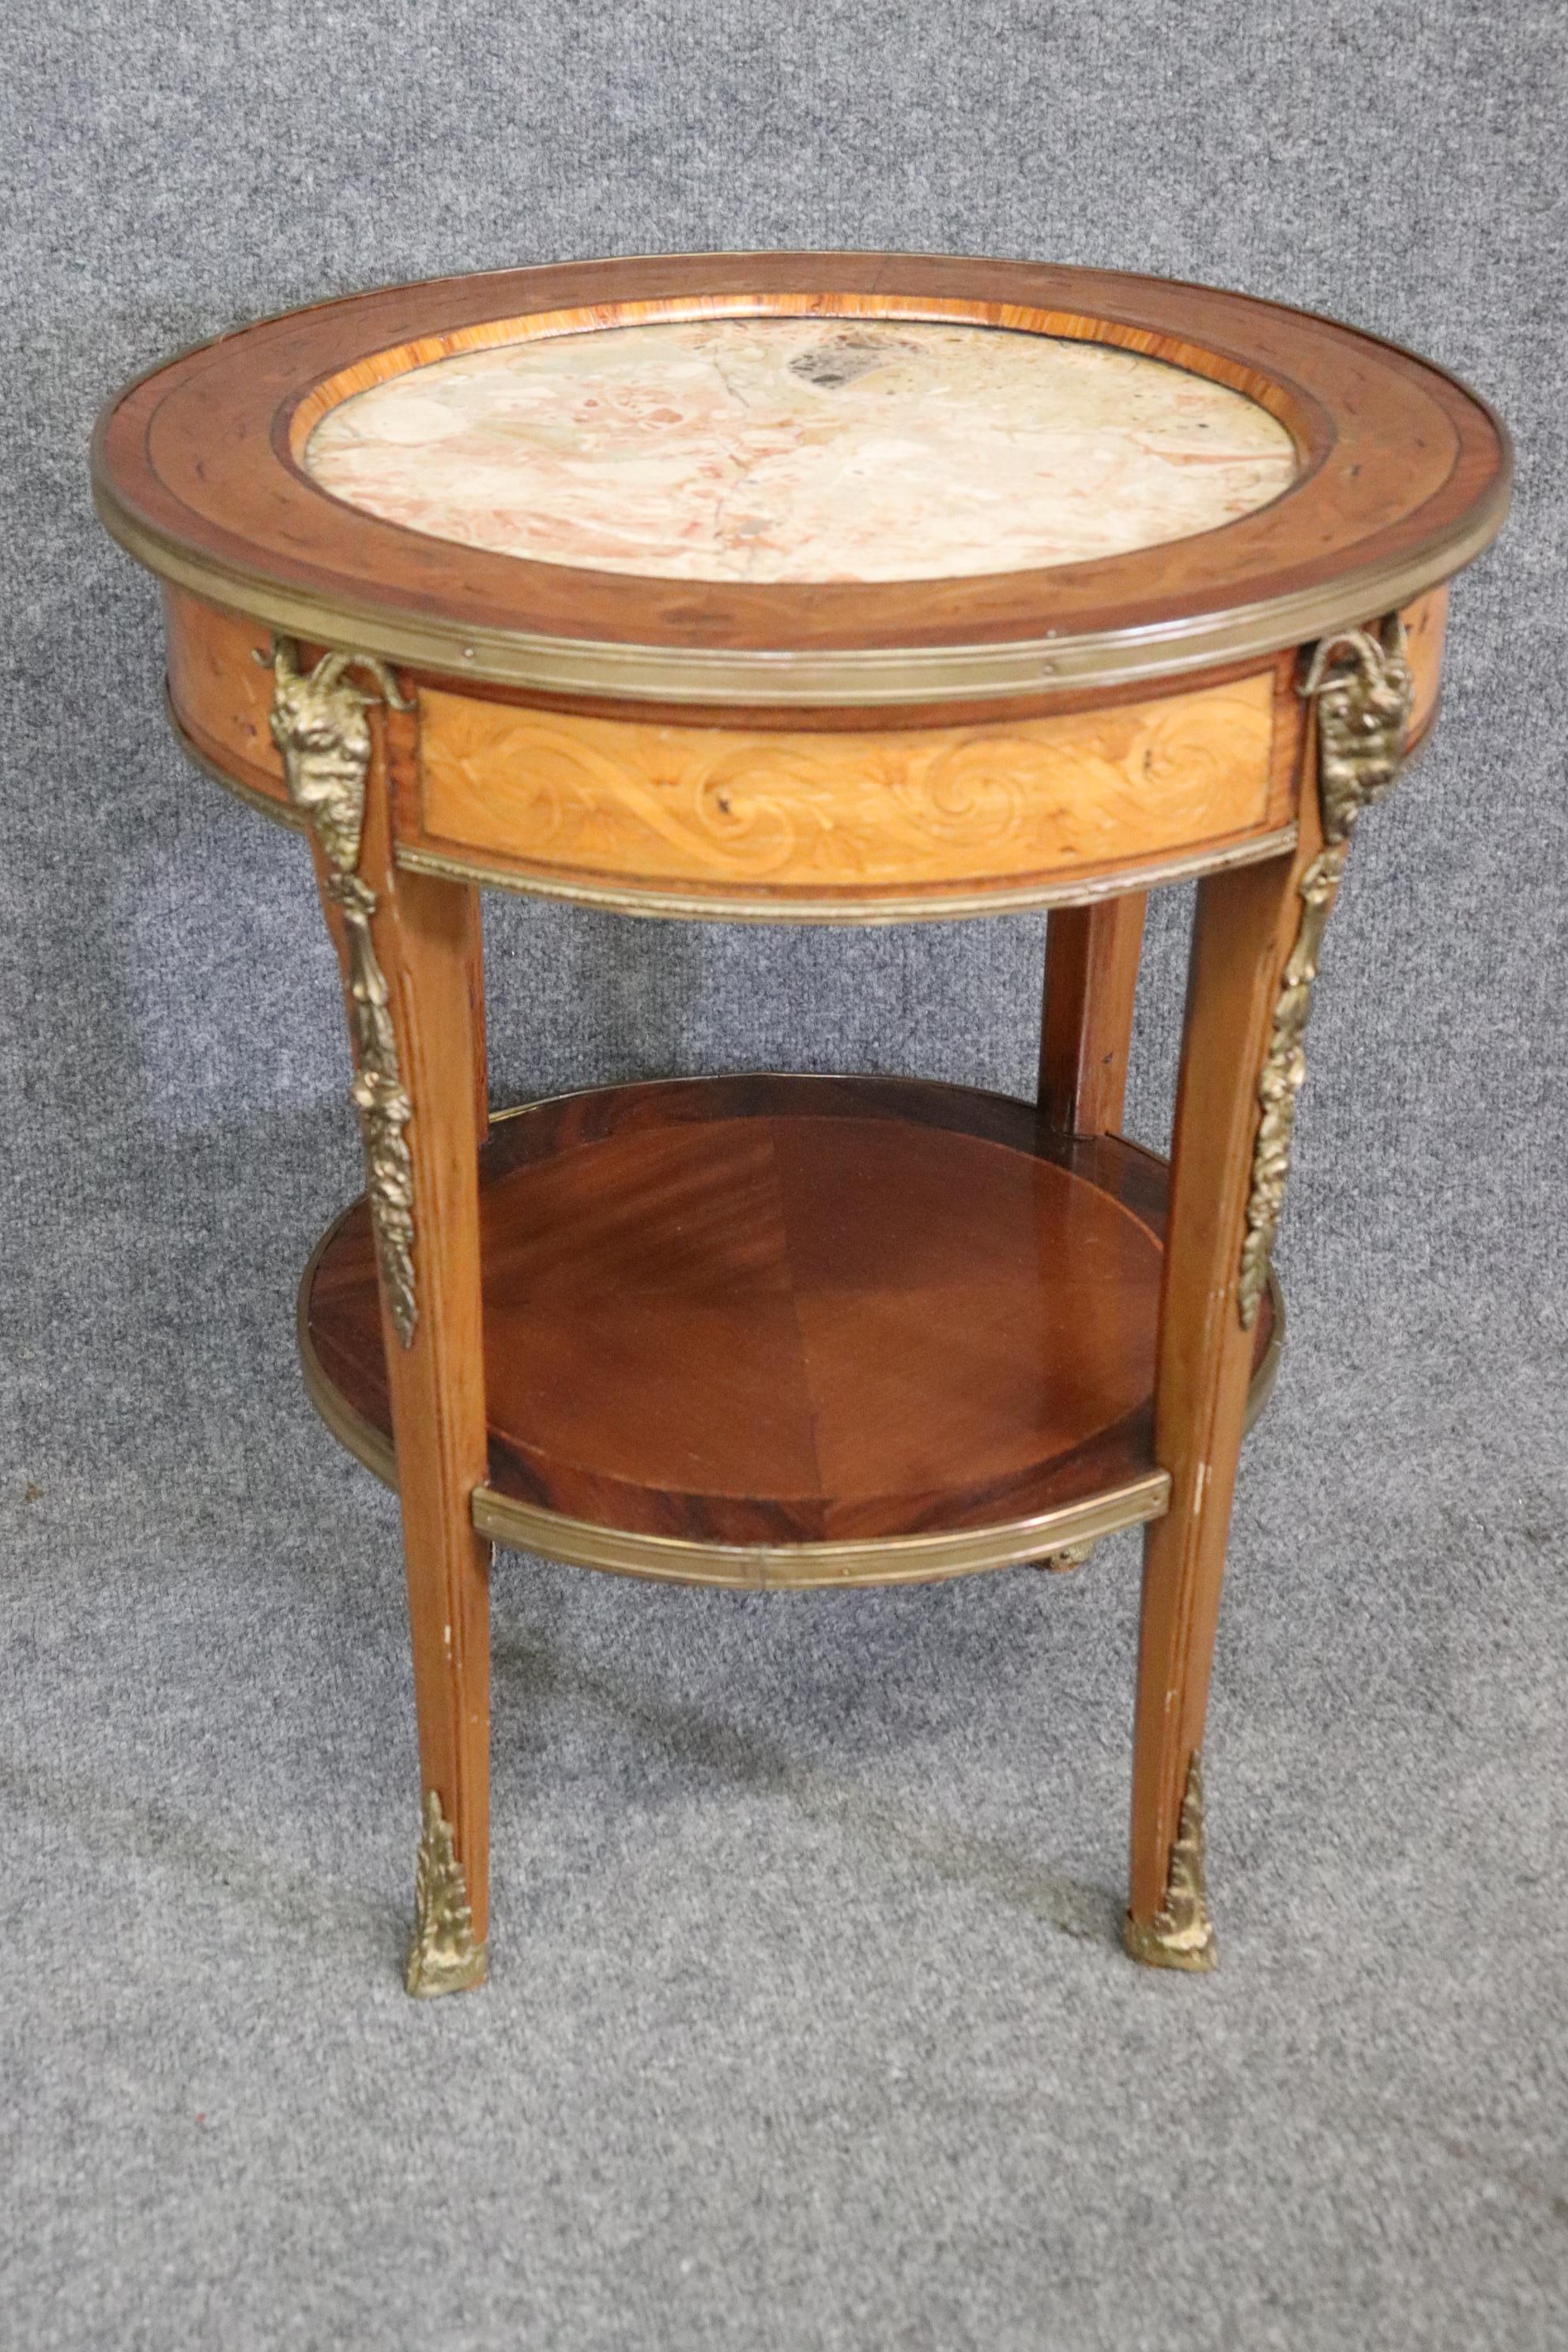 Superb Inlaid Satinwood and Walnut Marble Top Bronze Rams Head End Tables  2